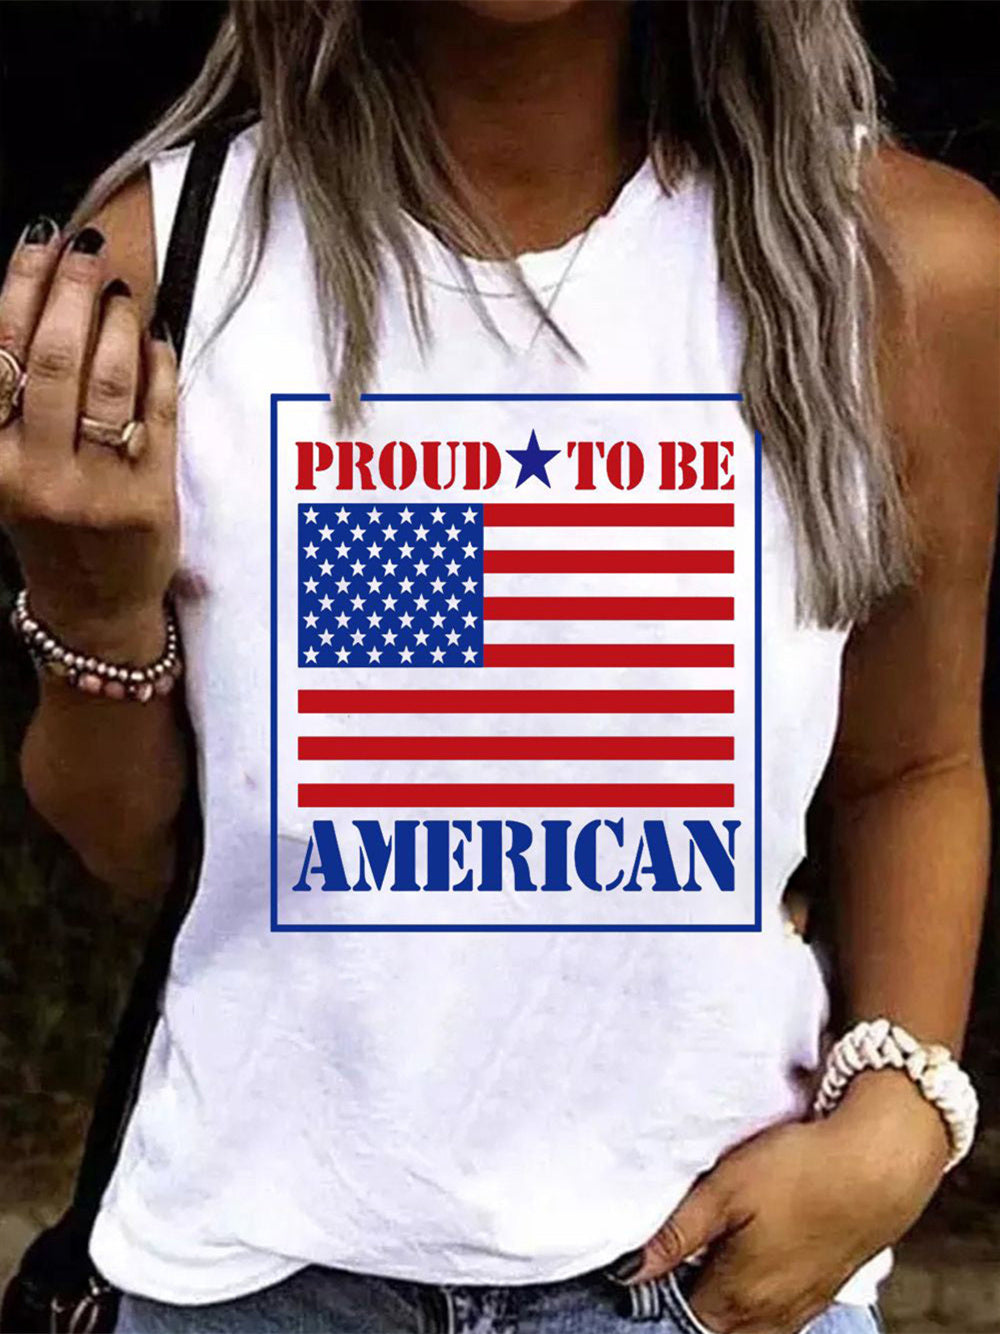 Proud to be American T-shirts